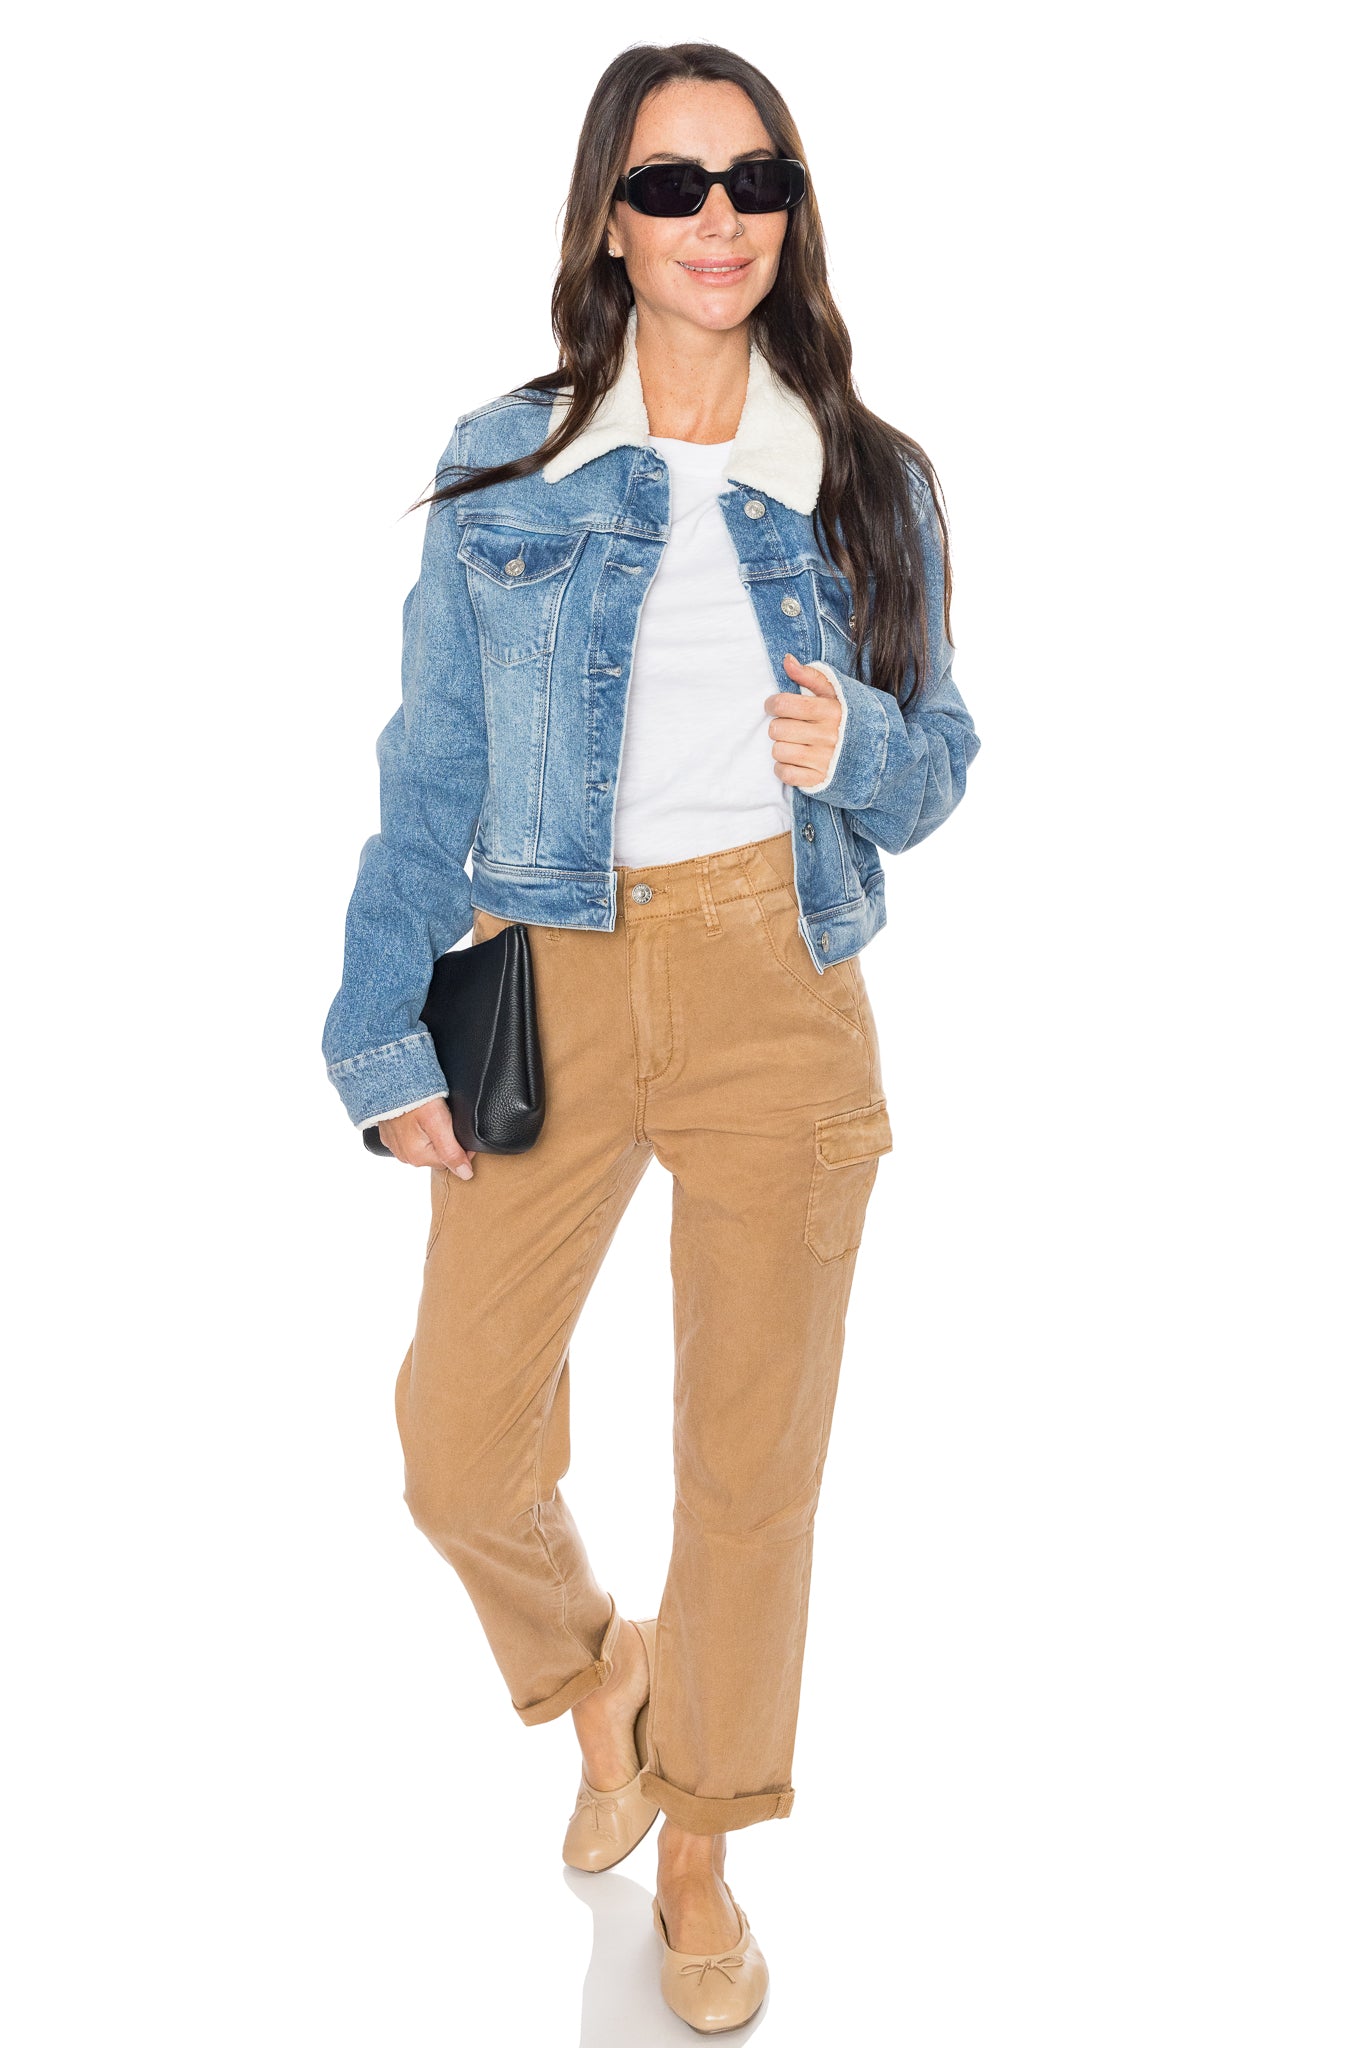 Relaxed Vivienne Jacket in Valerie Distressed